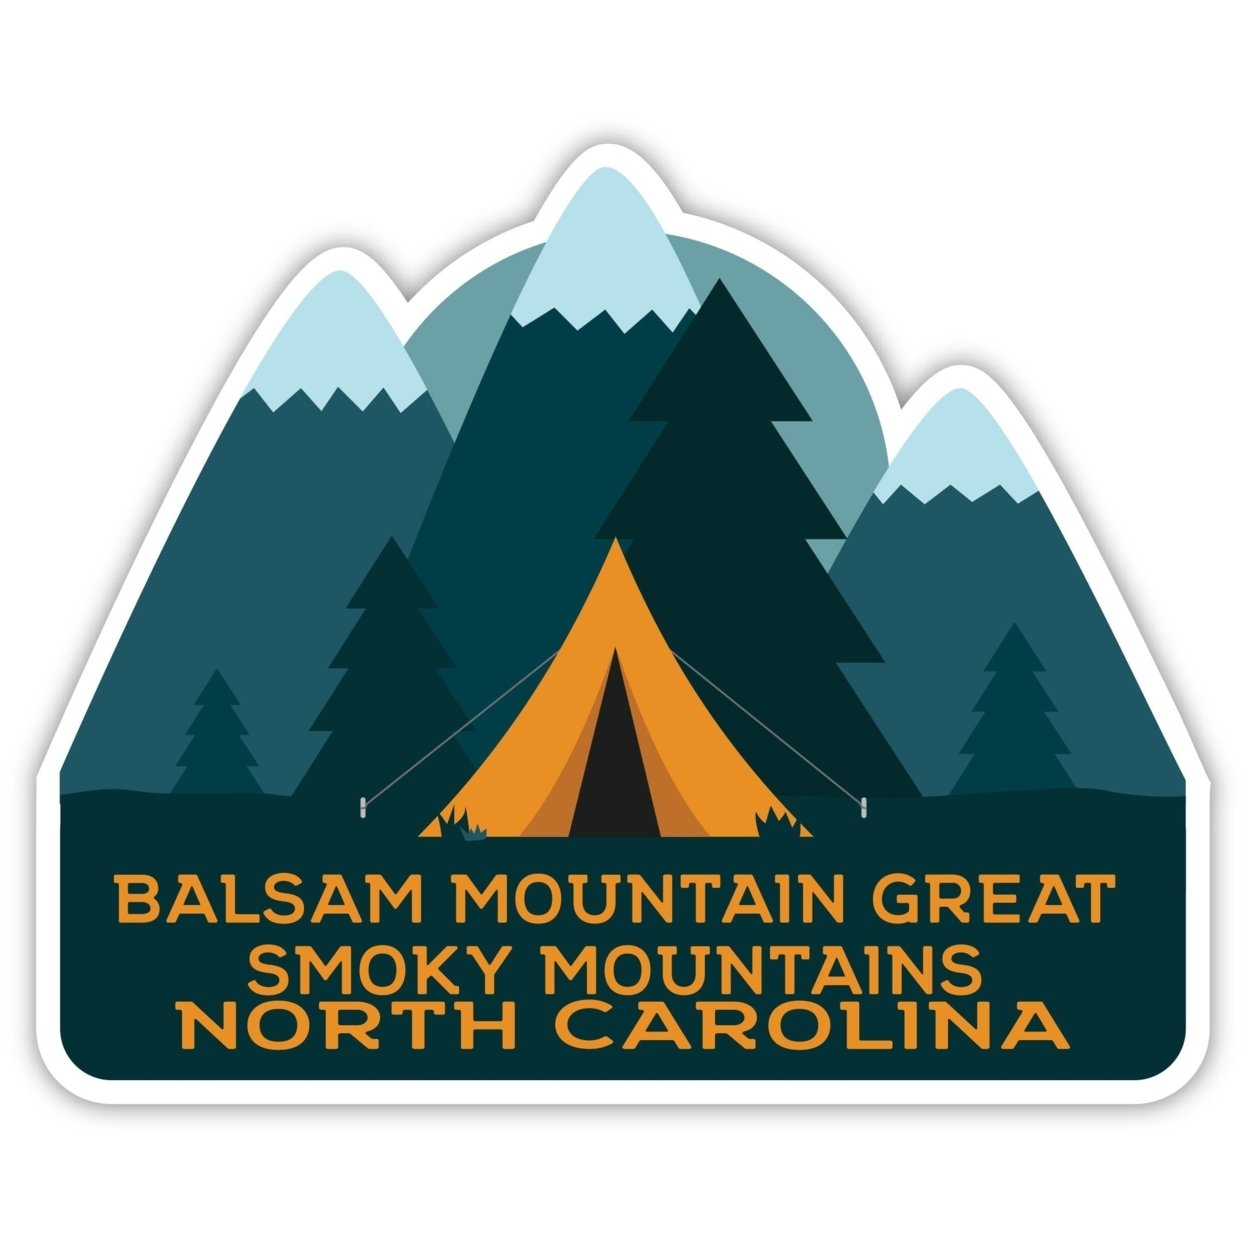 Balsam Mountain Great Smoky Mountains North Carolina Souvenir Decorative Stickers (Choose Theme And Size) - 4-Pack, 12-Inch, Tent